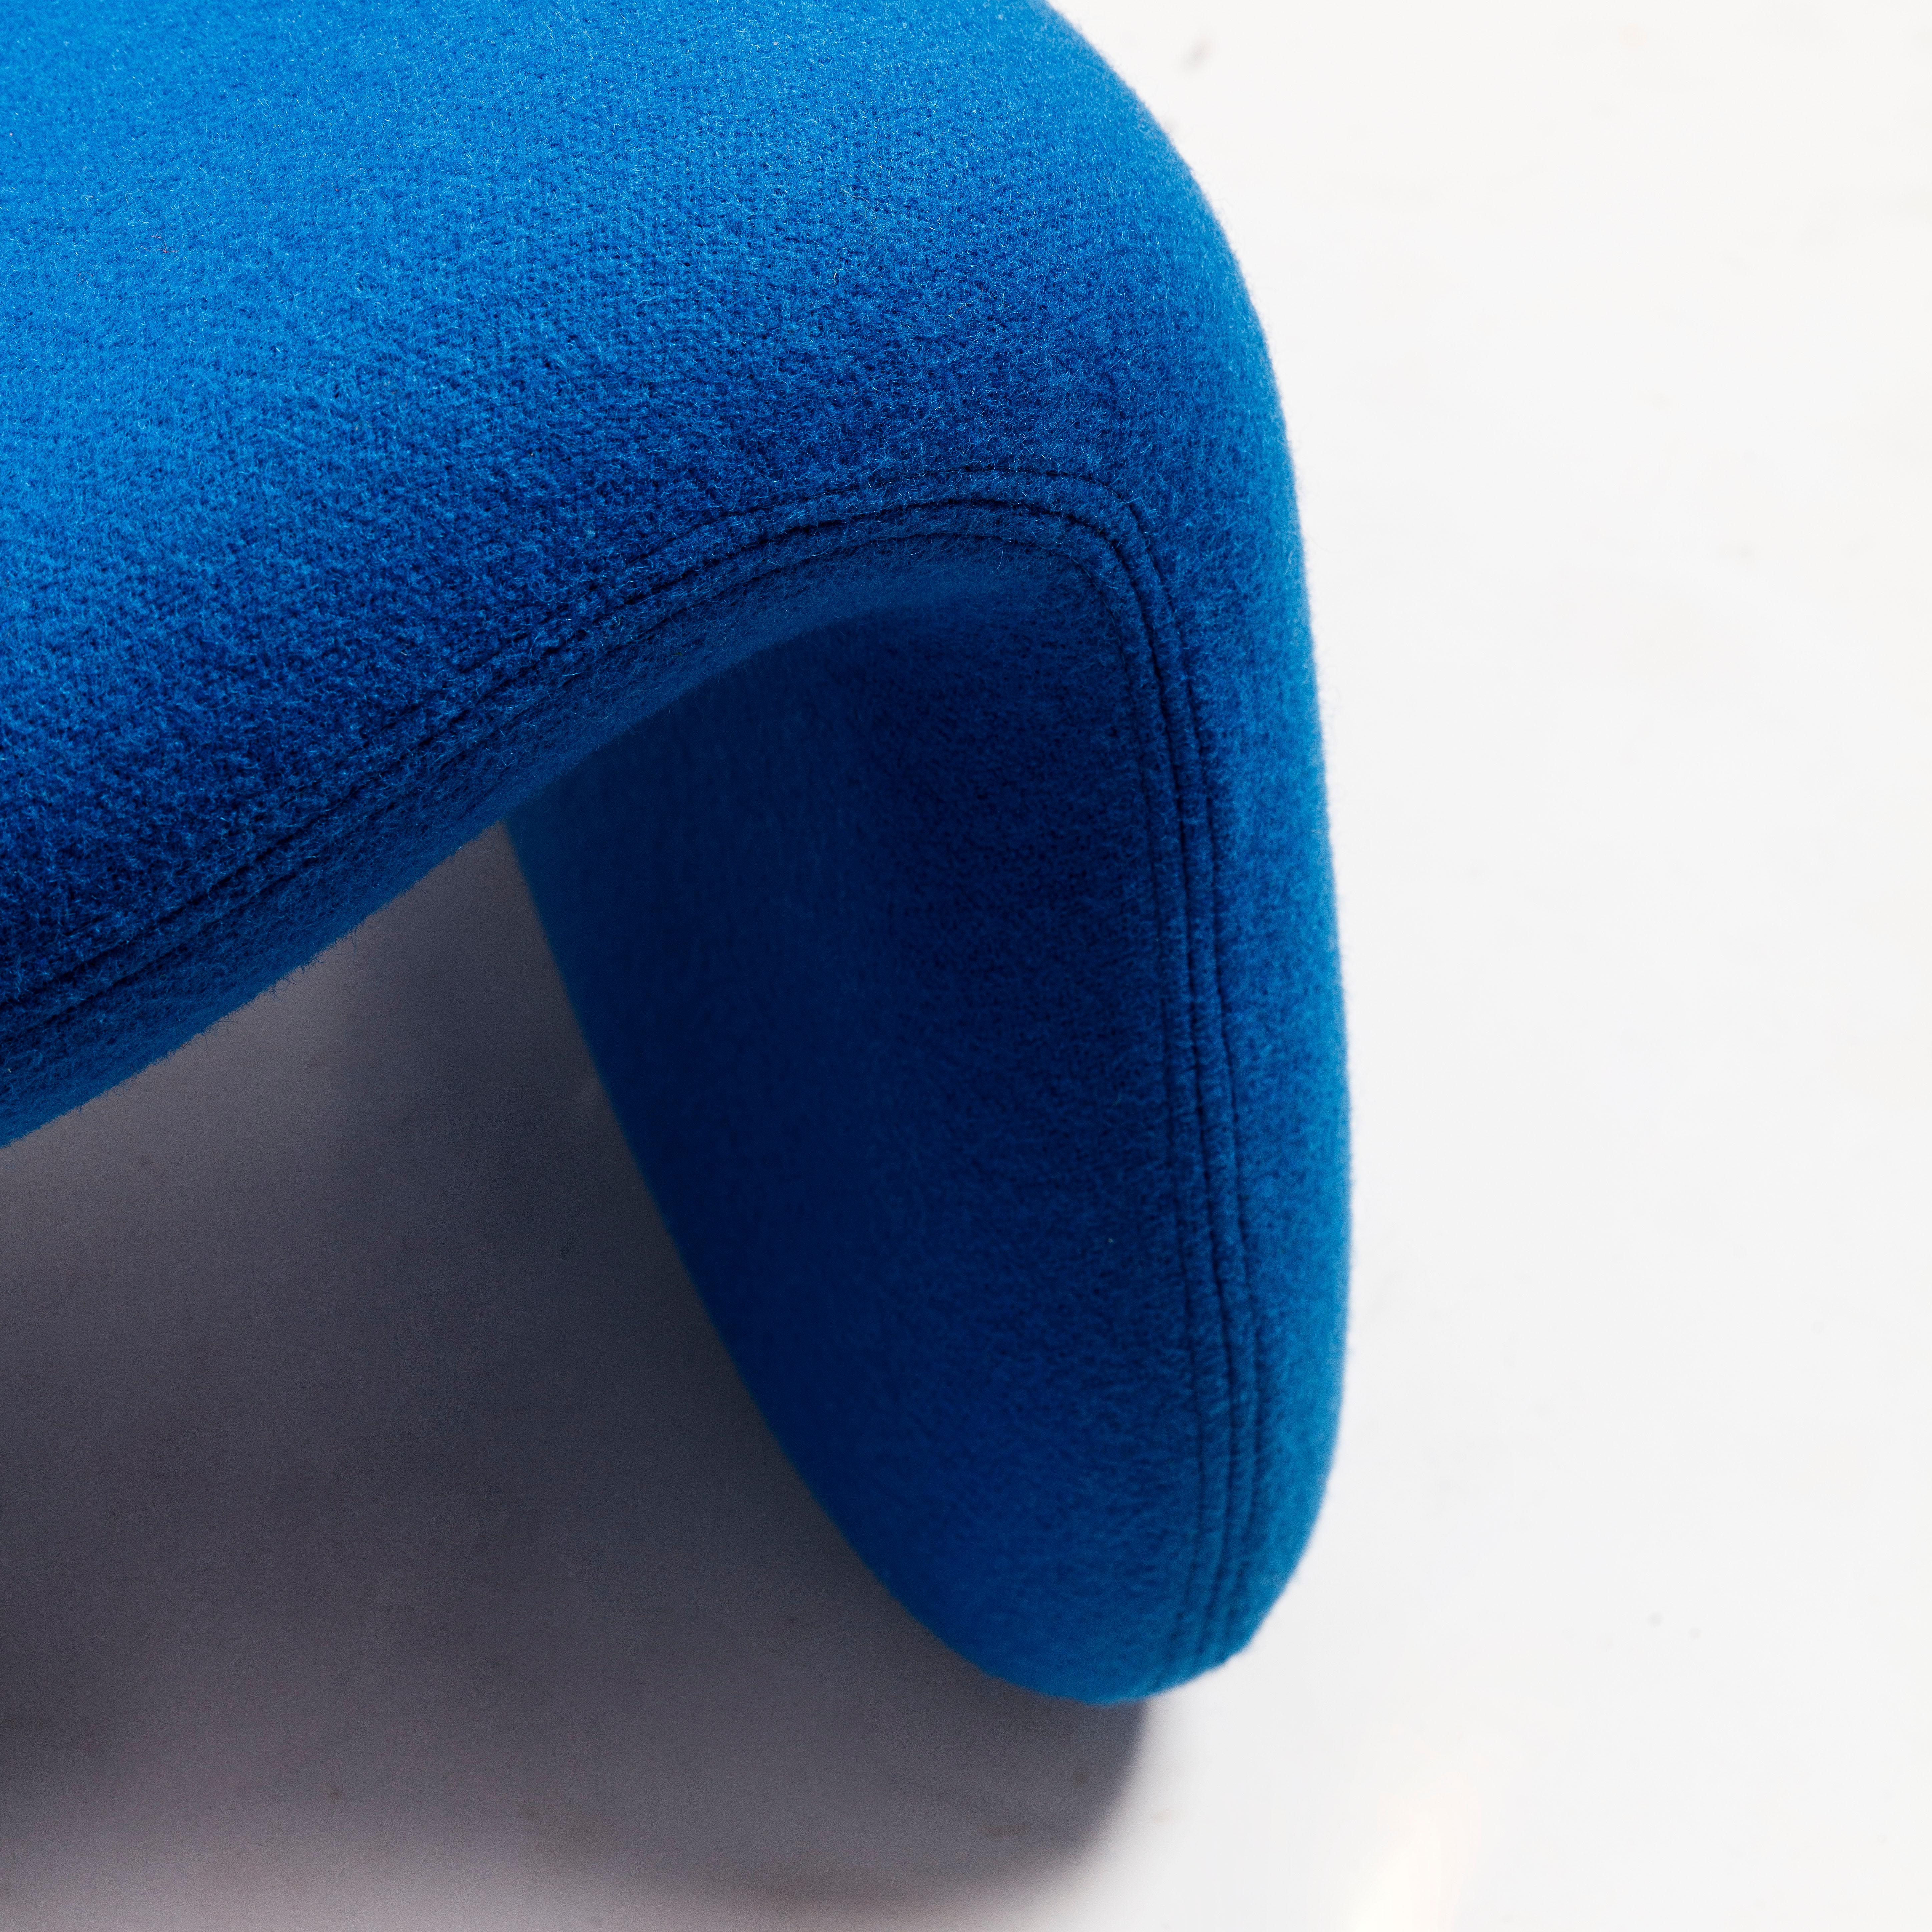 Olivier Mourgue Djinn Blue Armchair for Airborne 1960s New Kvadrat Fabric 8